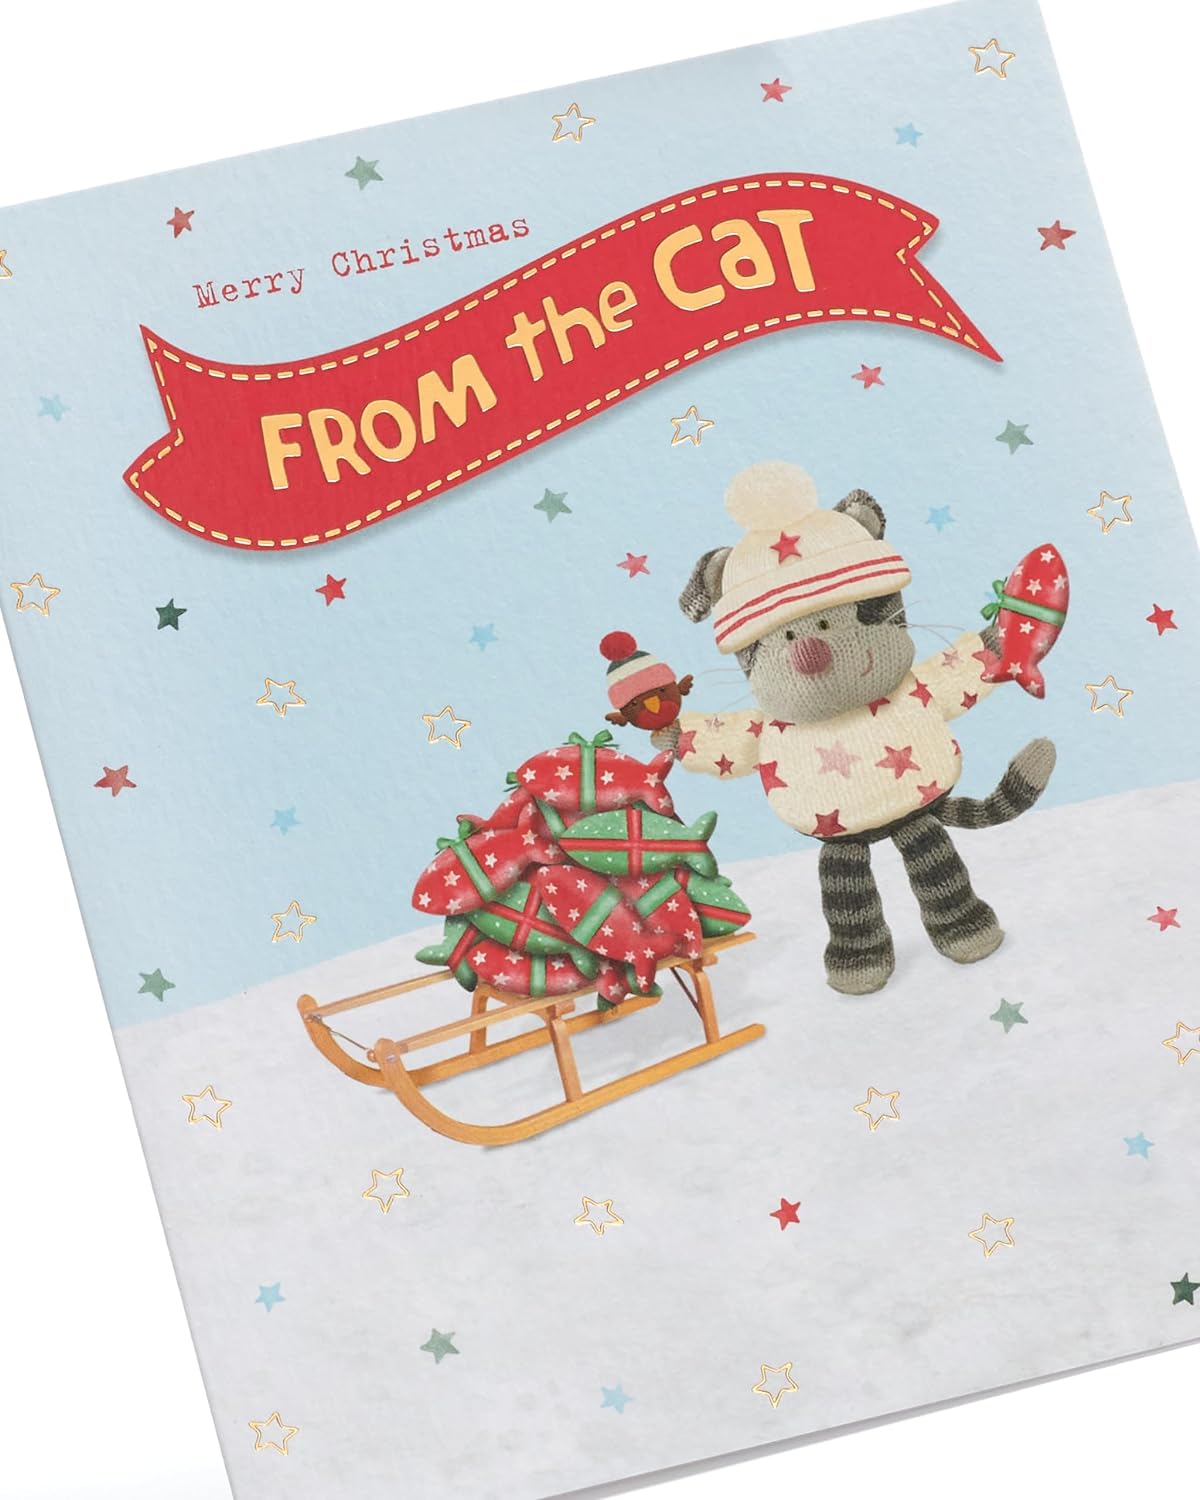 From the Cat Christmas Card Boofle Cute Design 